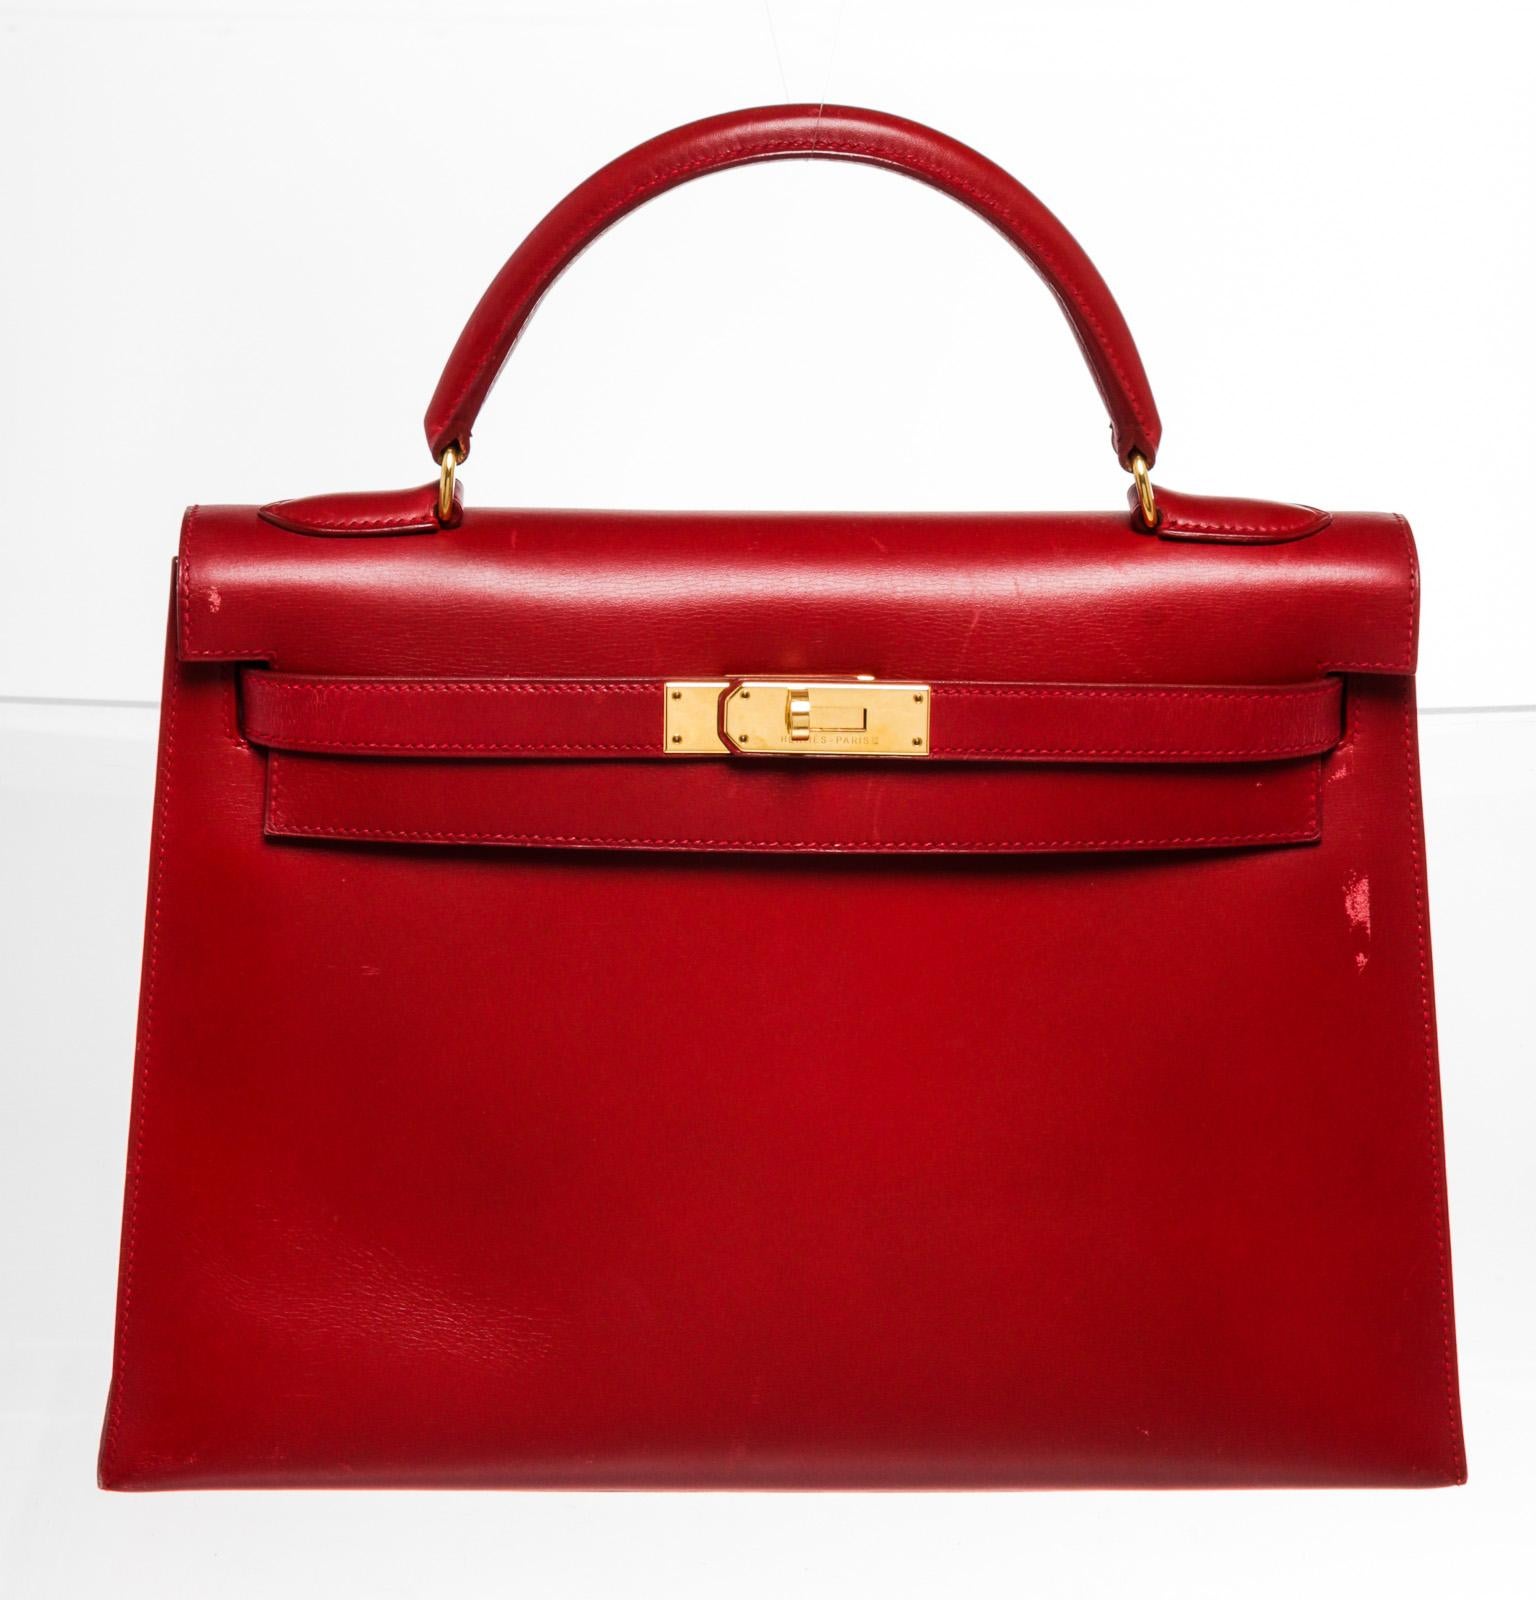 Hermes Red Leather Kelly 32cm Handbag with leather, gold-toneÂ hardware, trim leather, interior zip pocket, lining leather, top handle,Â and turn lockÂ closure.Â PLEASE NOTE: Item redyed.

48995MSC